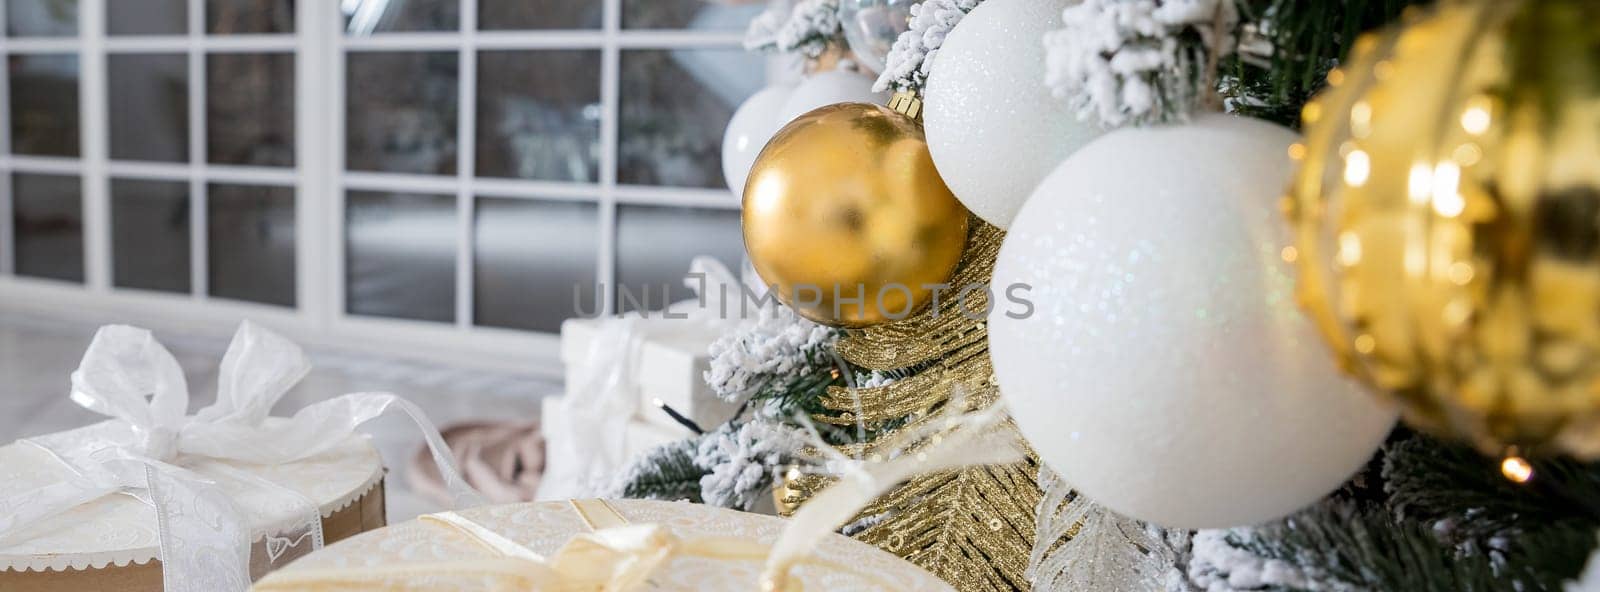 Christmas background. Christmas boarder with fir tree branch with cones and ornament. Christmas baubles in golden and red colour.